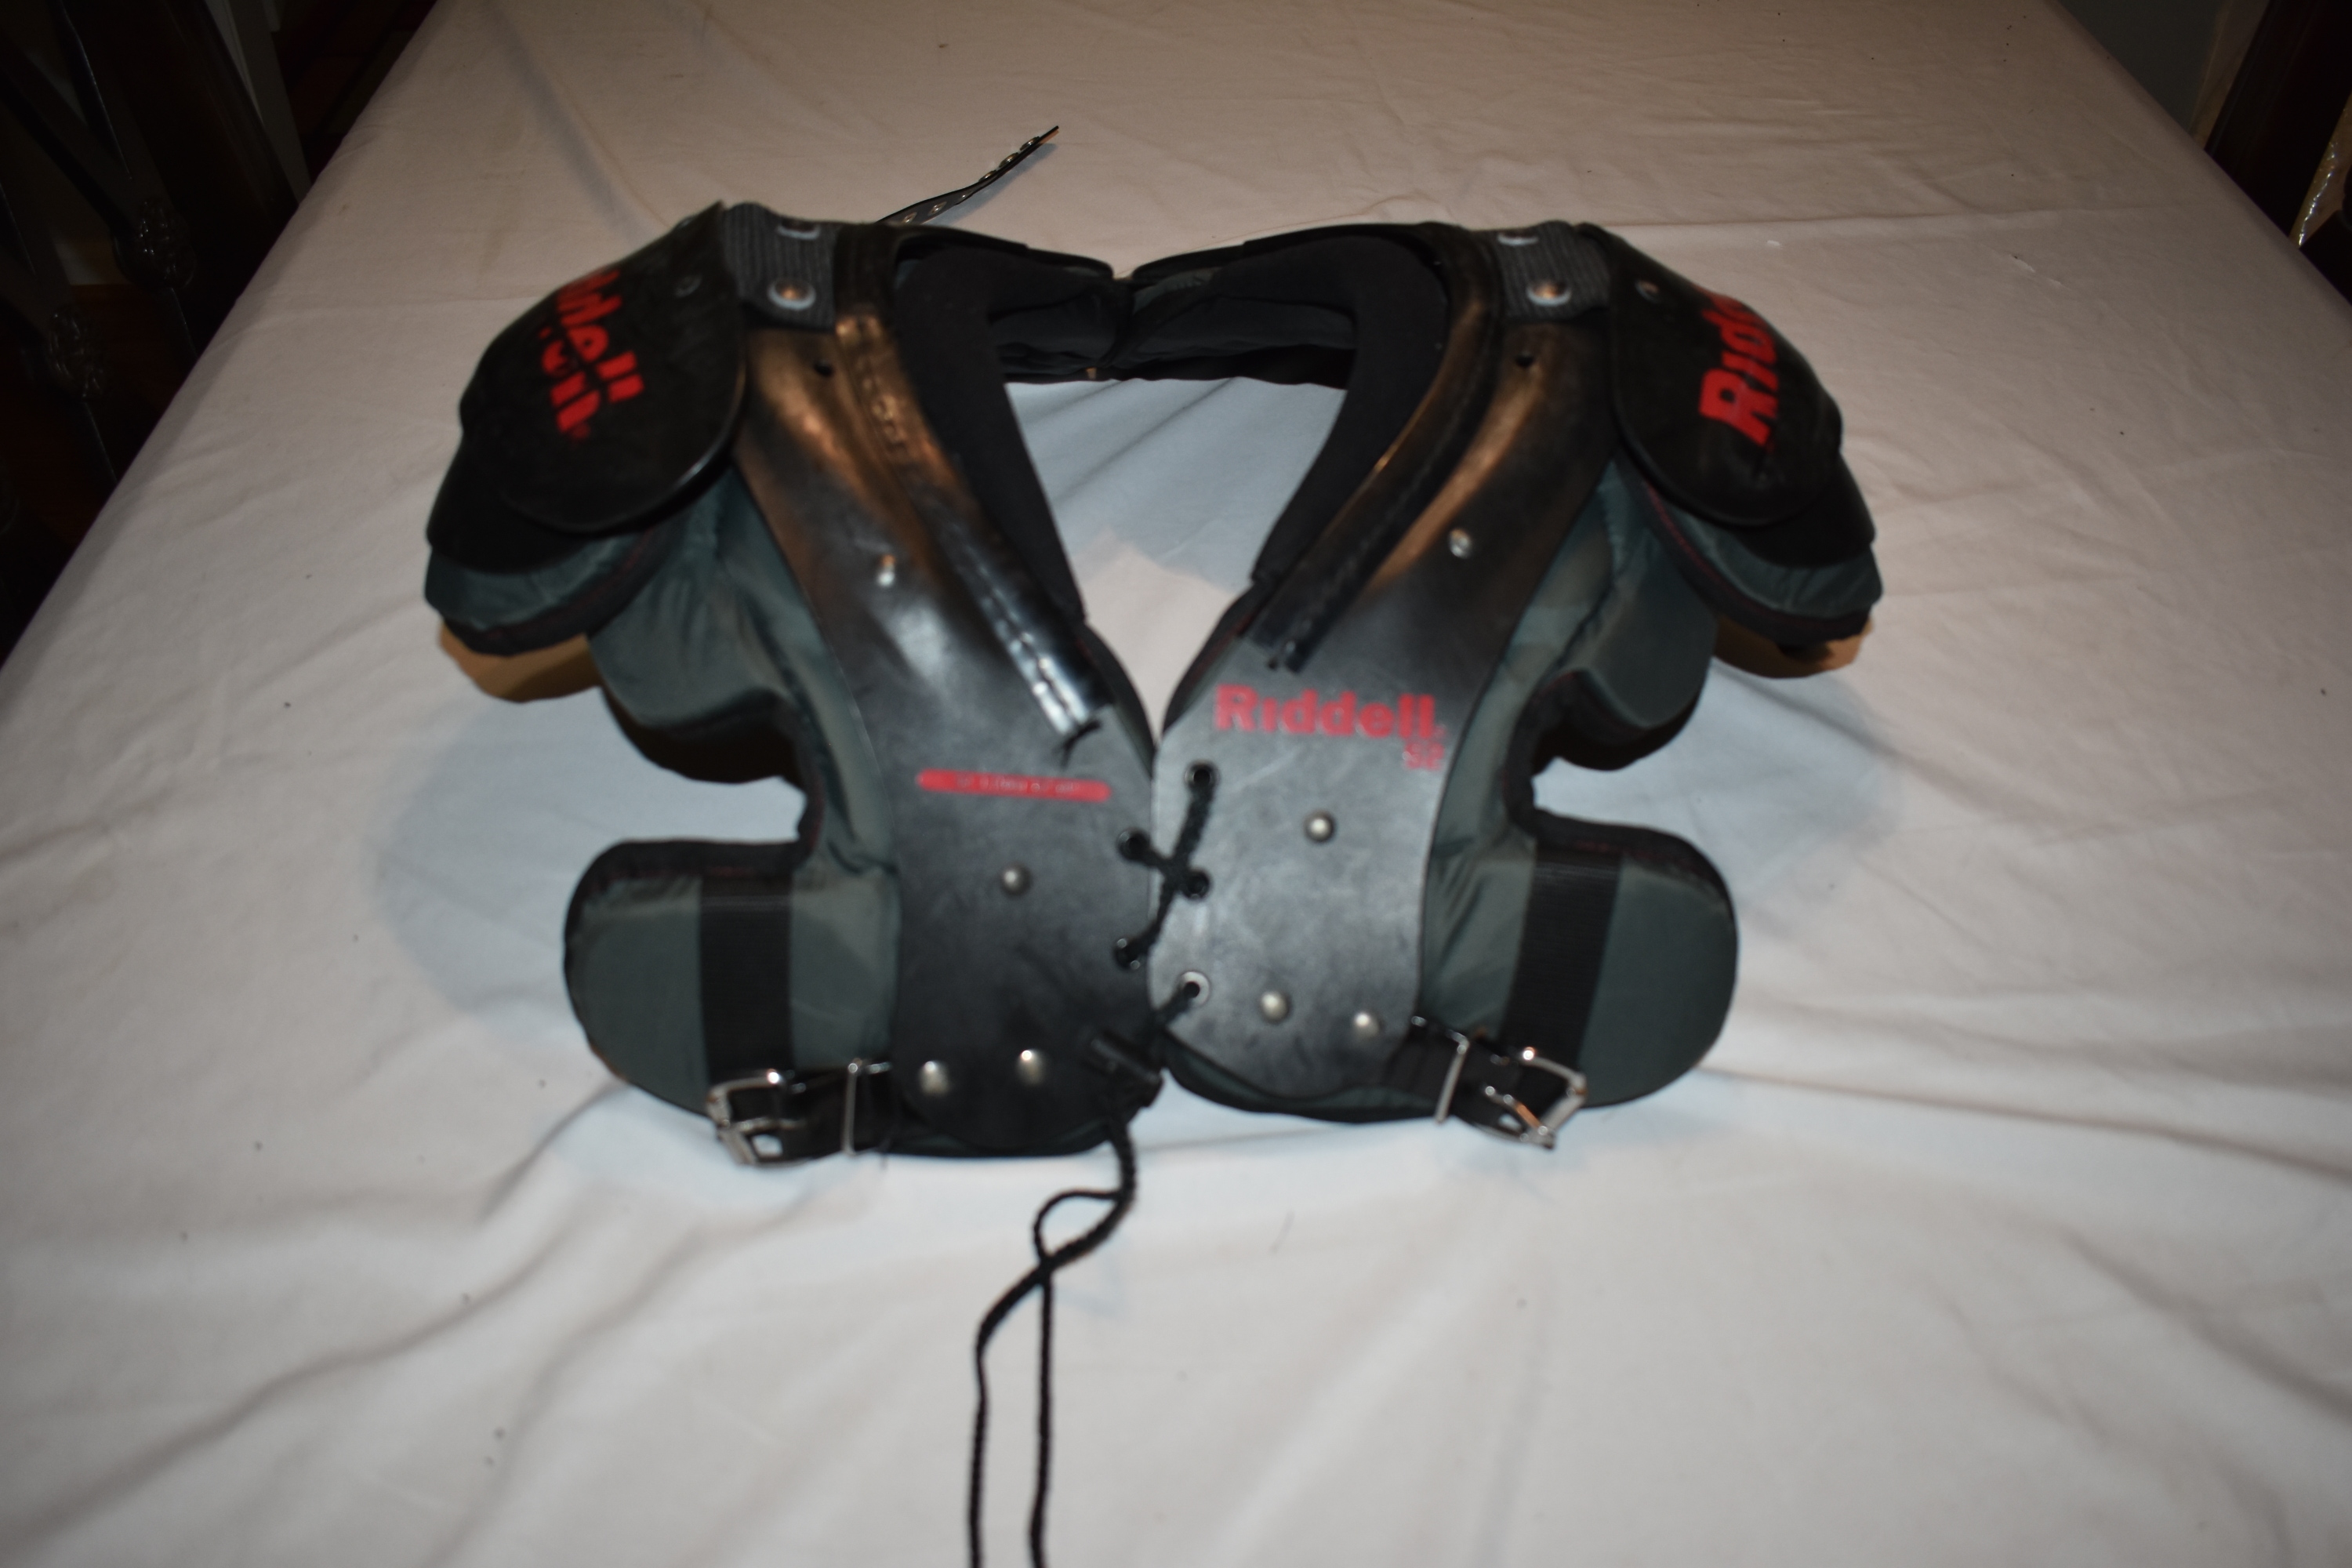 Riddell S2 Football Shoulder Pads, Youth Large (13-14") - Good Condition!